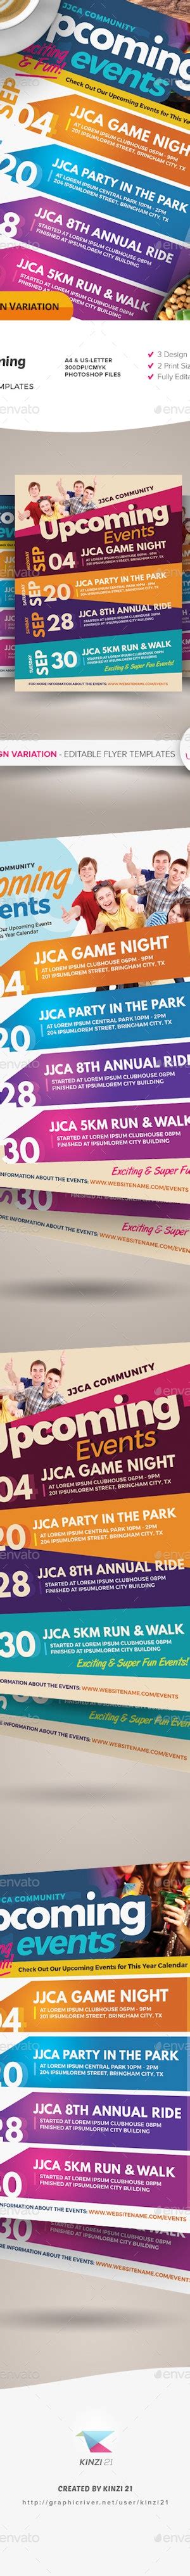 Upcoming Events Flyer Templates By Kinzi21 Graphicriver